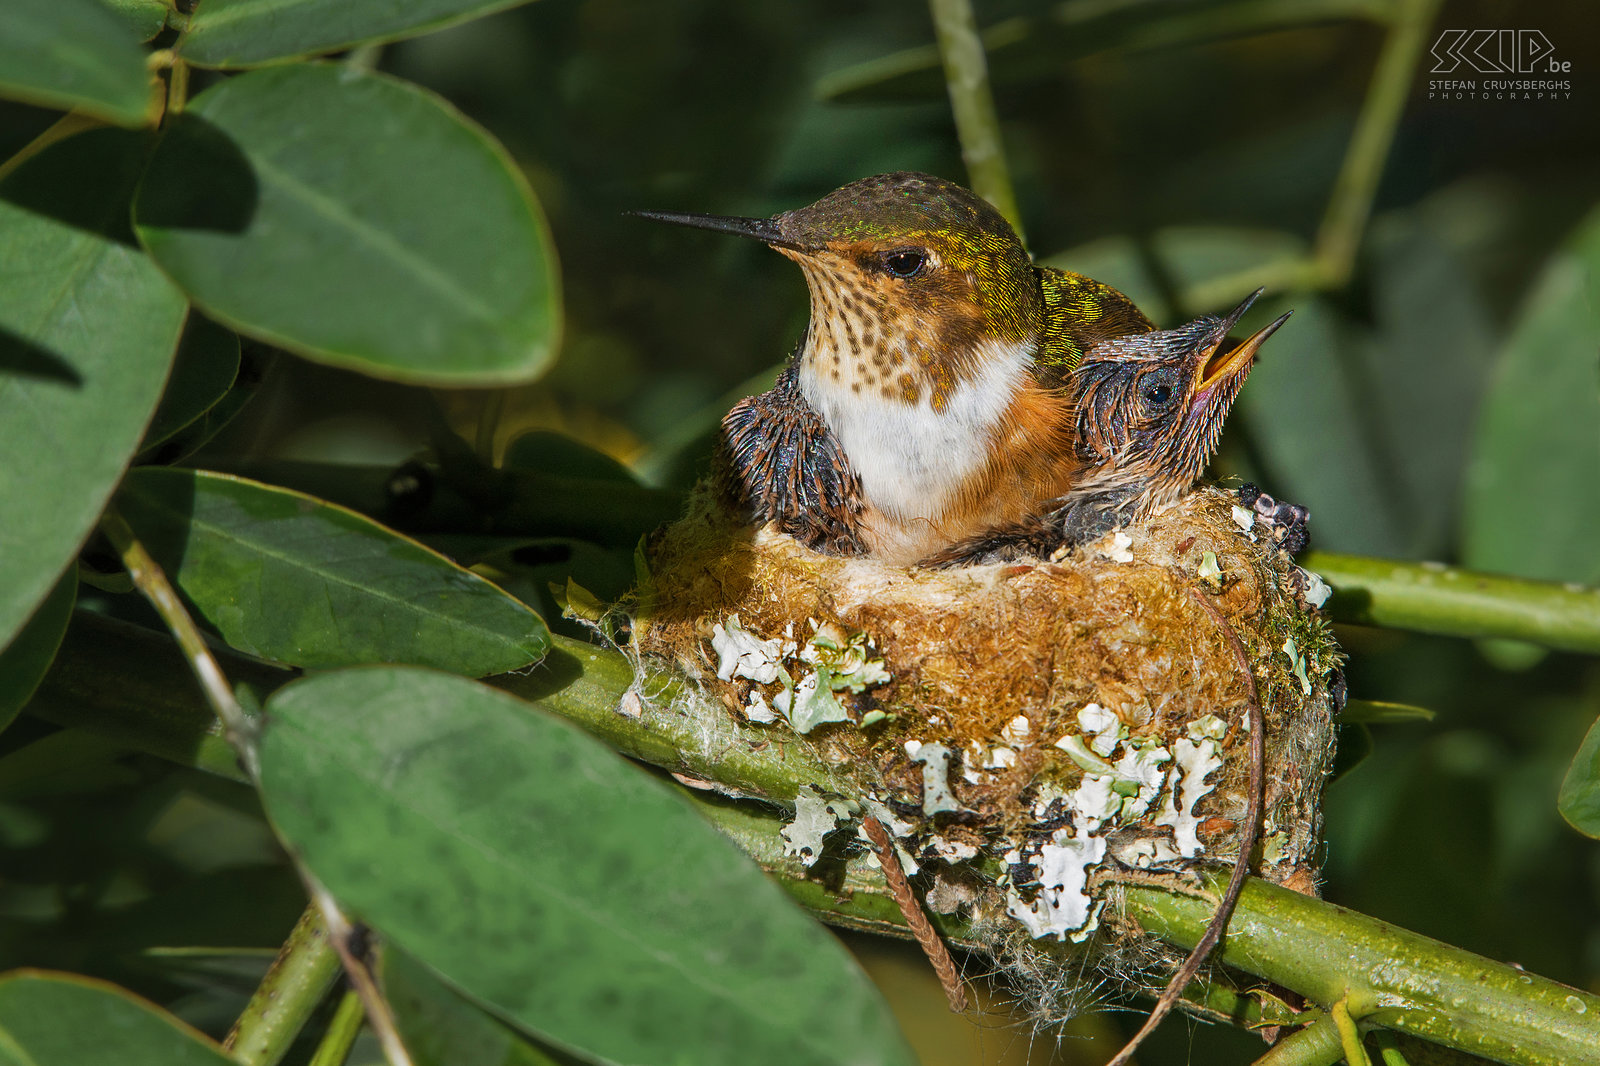 San Gerardo de Dota - Scintillant hummingbird with nest The scintillant hummingbird (selasphorus scintilla) is one of the smallest hummingbirds (6-8cm) which can be found in the mountains of Costa Rica. In the valley of San Gerardo de Dota we spotted several onces like this one on a small nest with two young hummingbirds. Stefan Cruysberghs